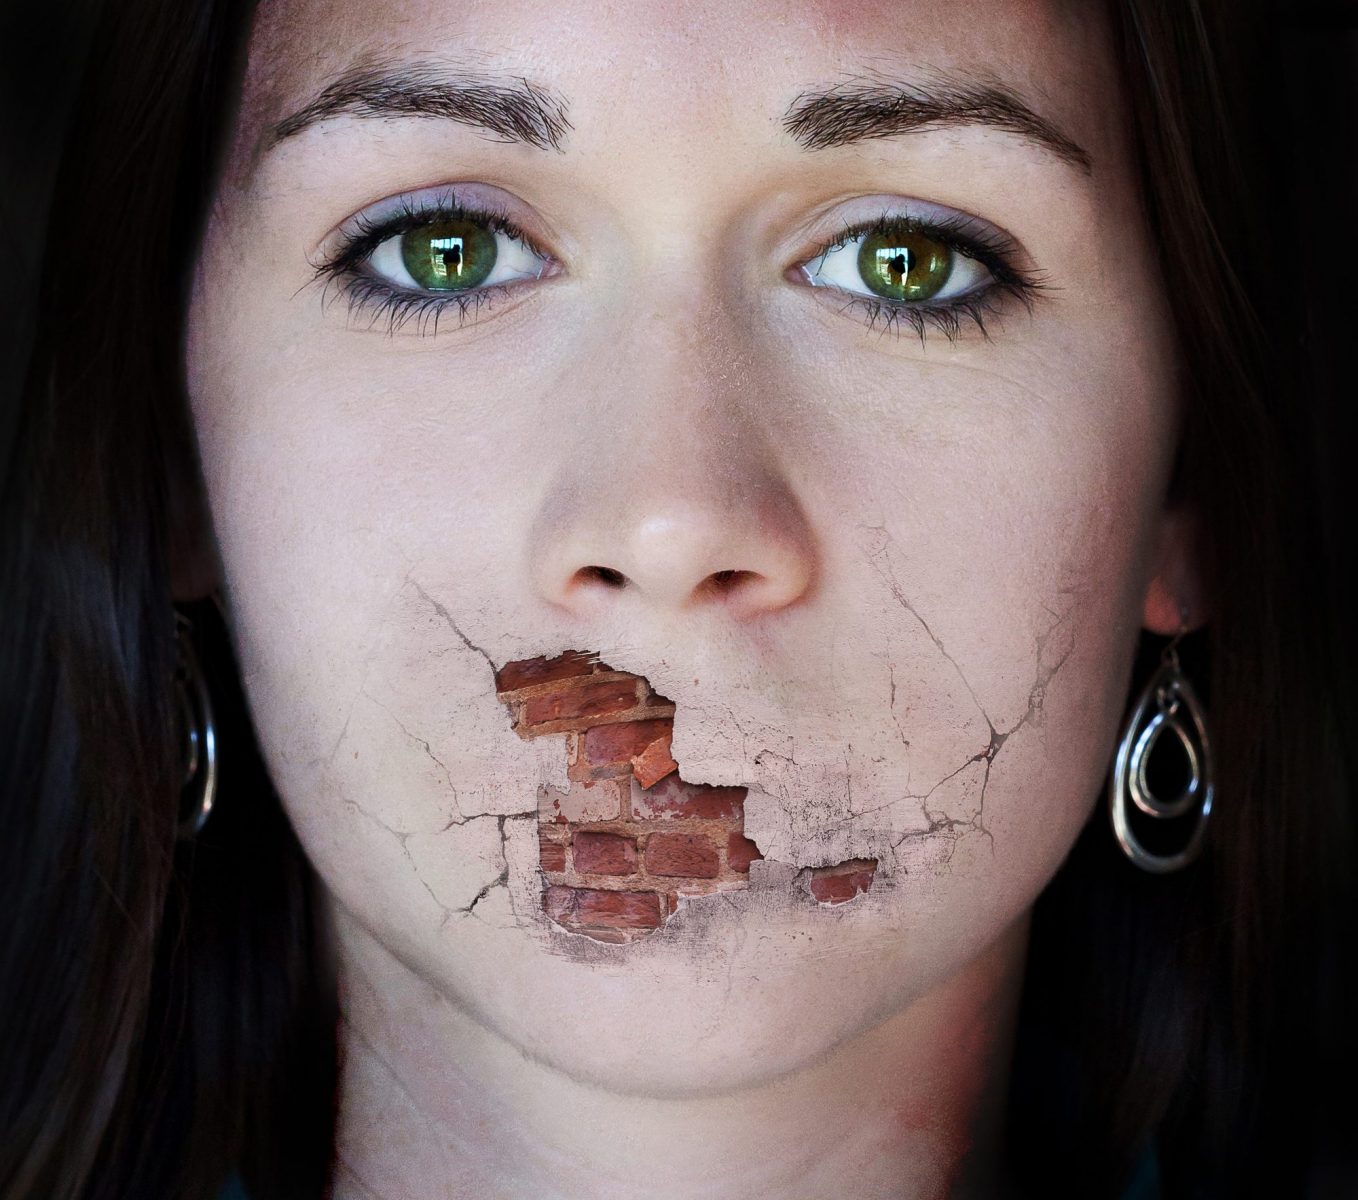 A woman tries to speak but her mouth is a broken brick wall.